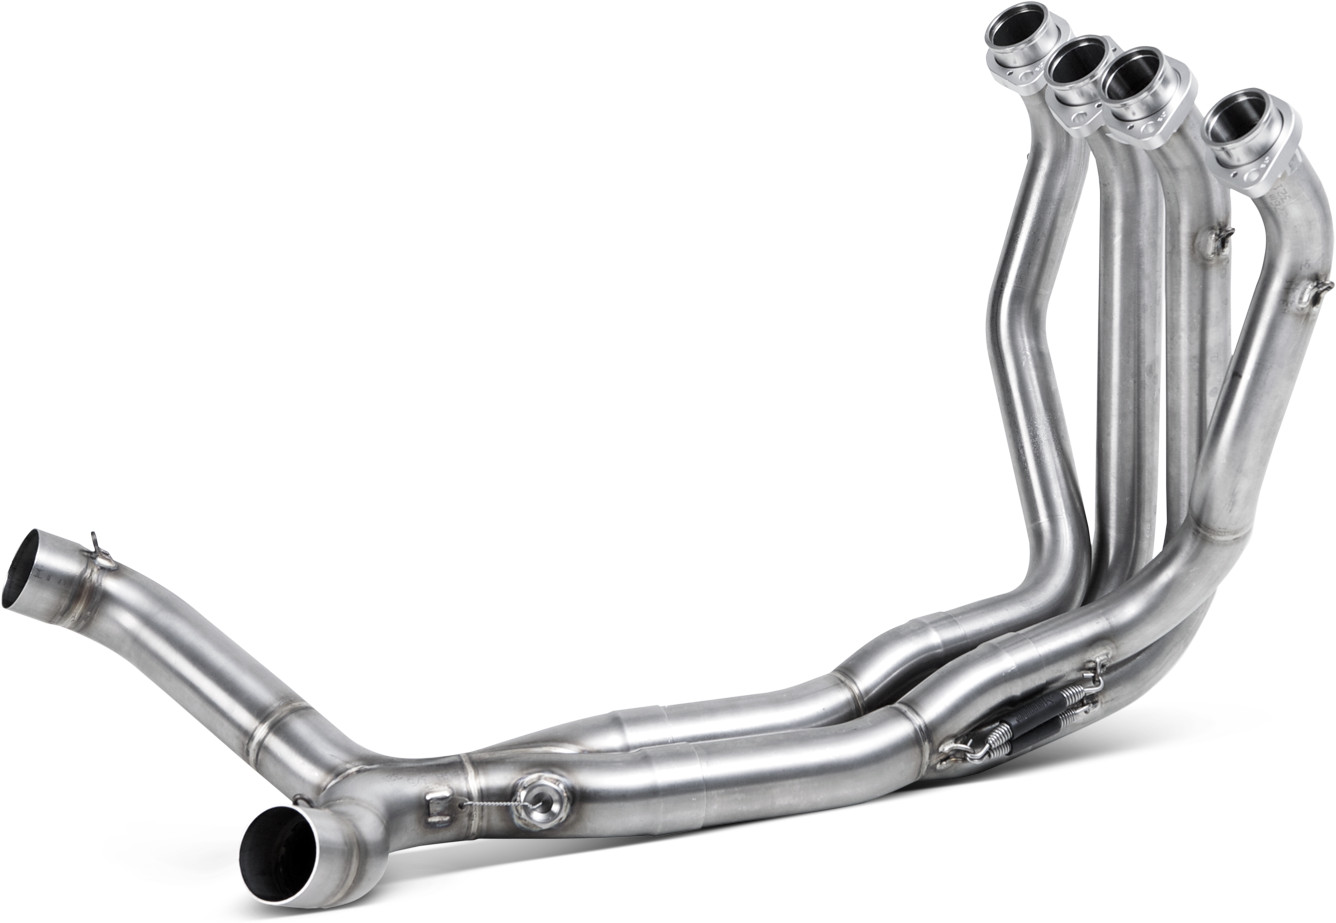 Stainless Steel Exhaust Headers - For 14-19 Kawasaki Z1000 & Ninja 1000 - Click Image to Close